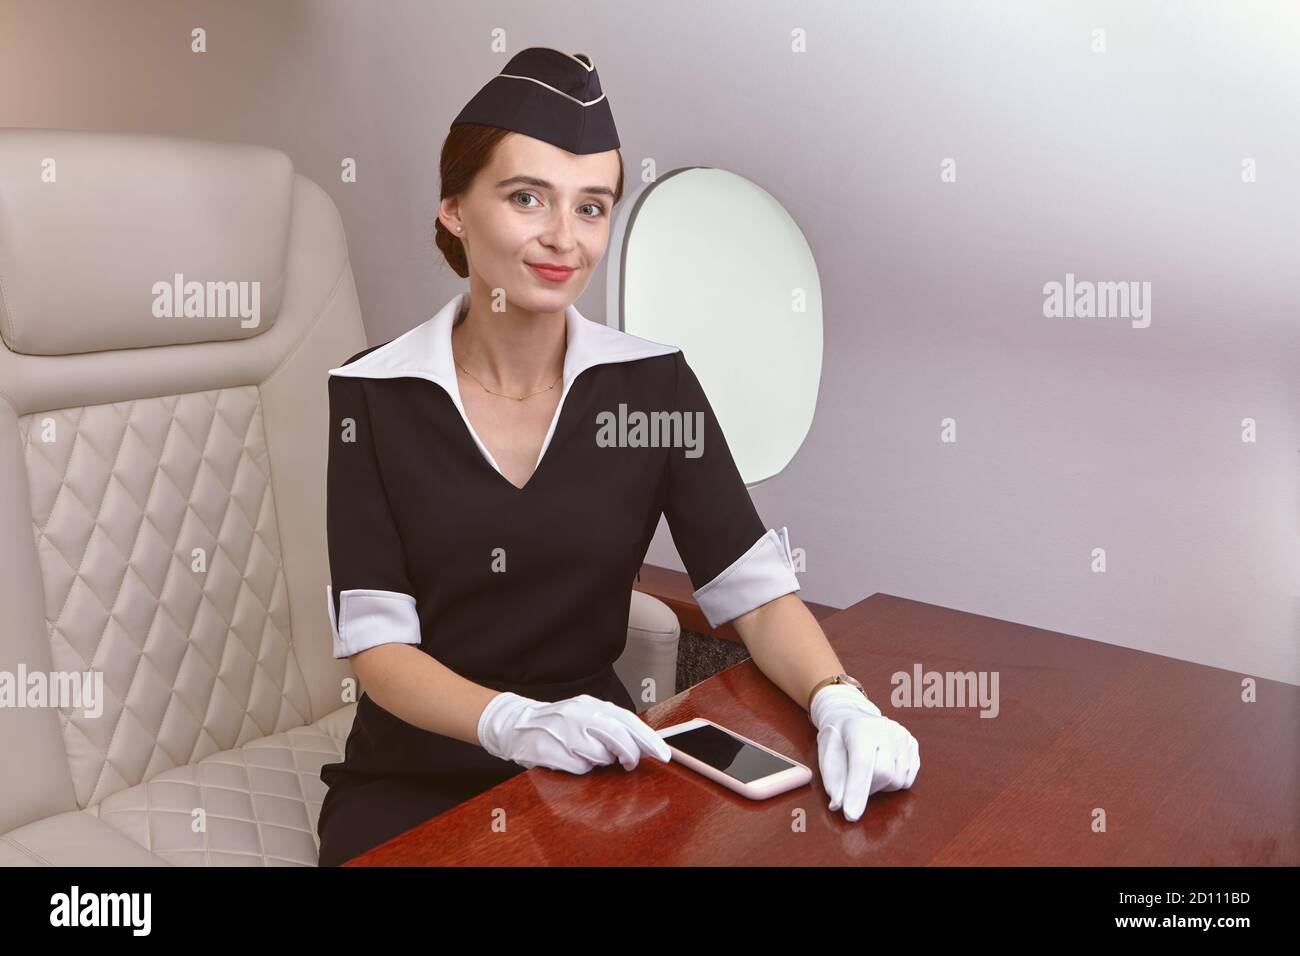 Air steward in passenger cabin inside plane. The flight attendant sits in an airplane seat near the window. Stock Photo